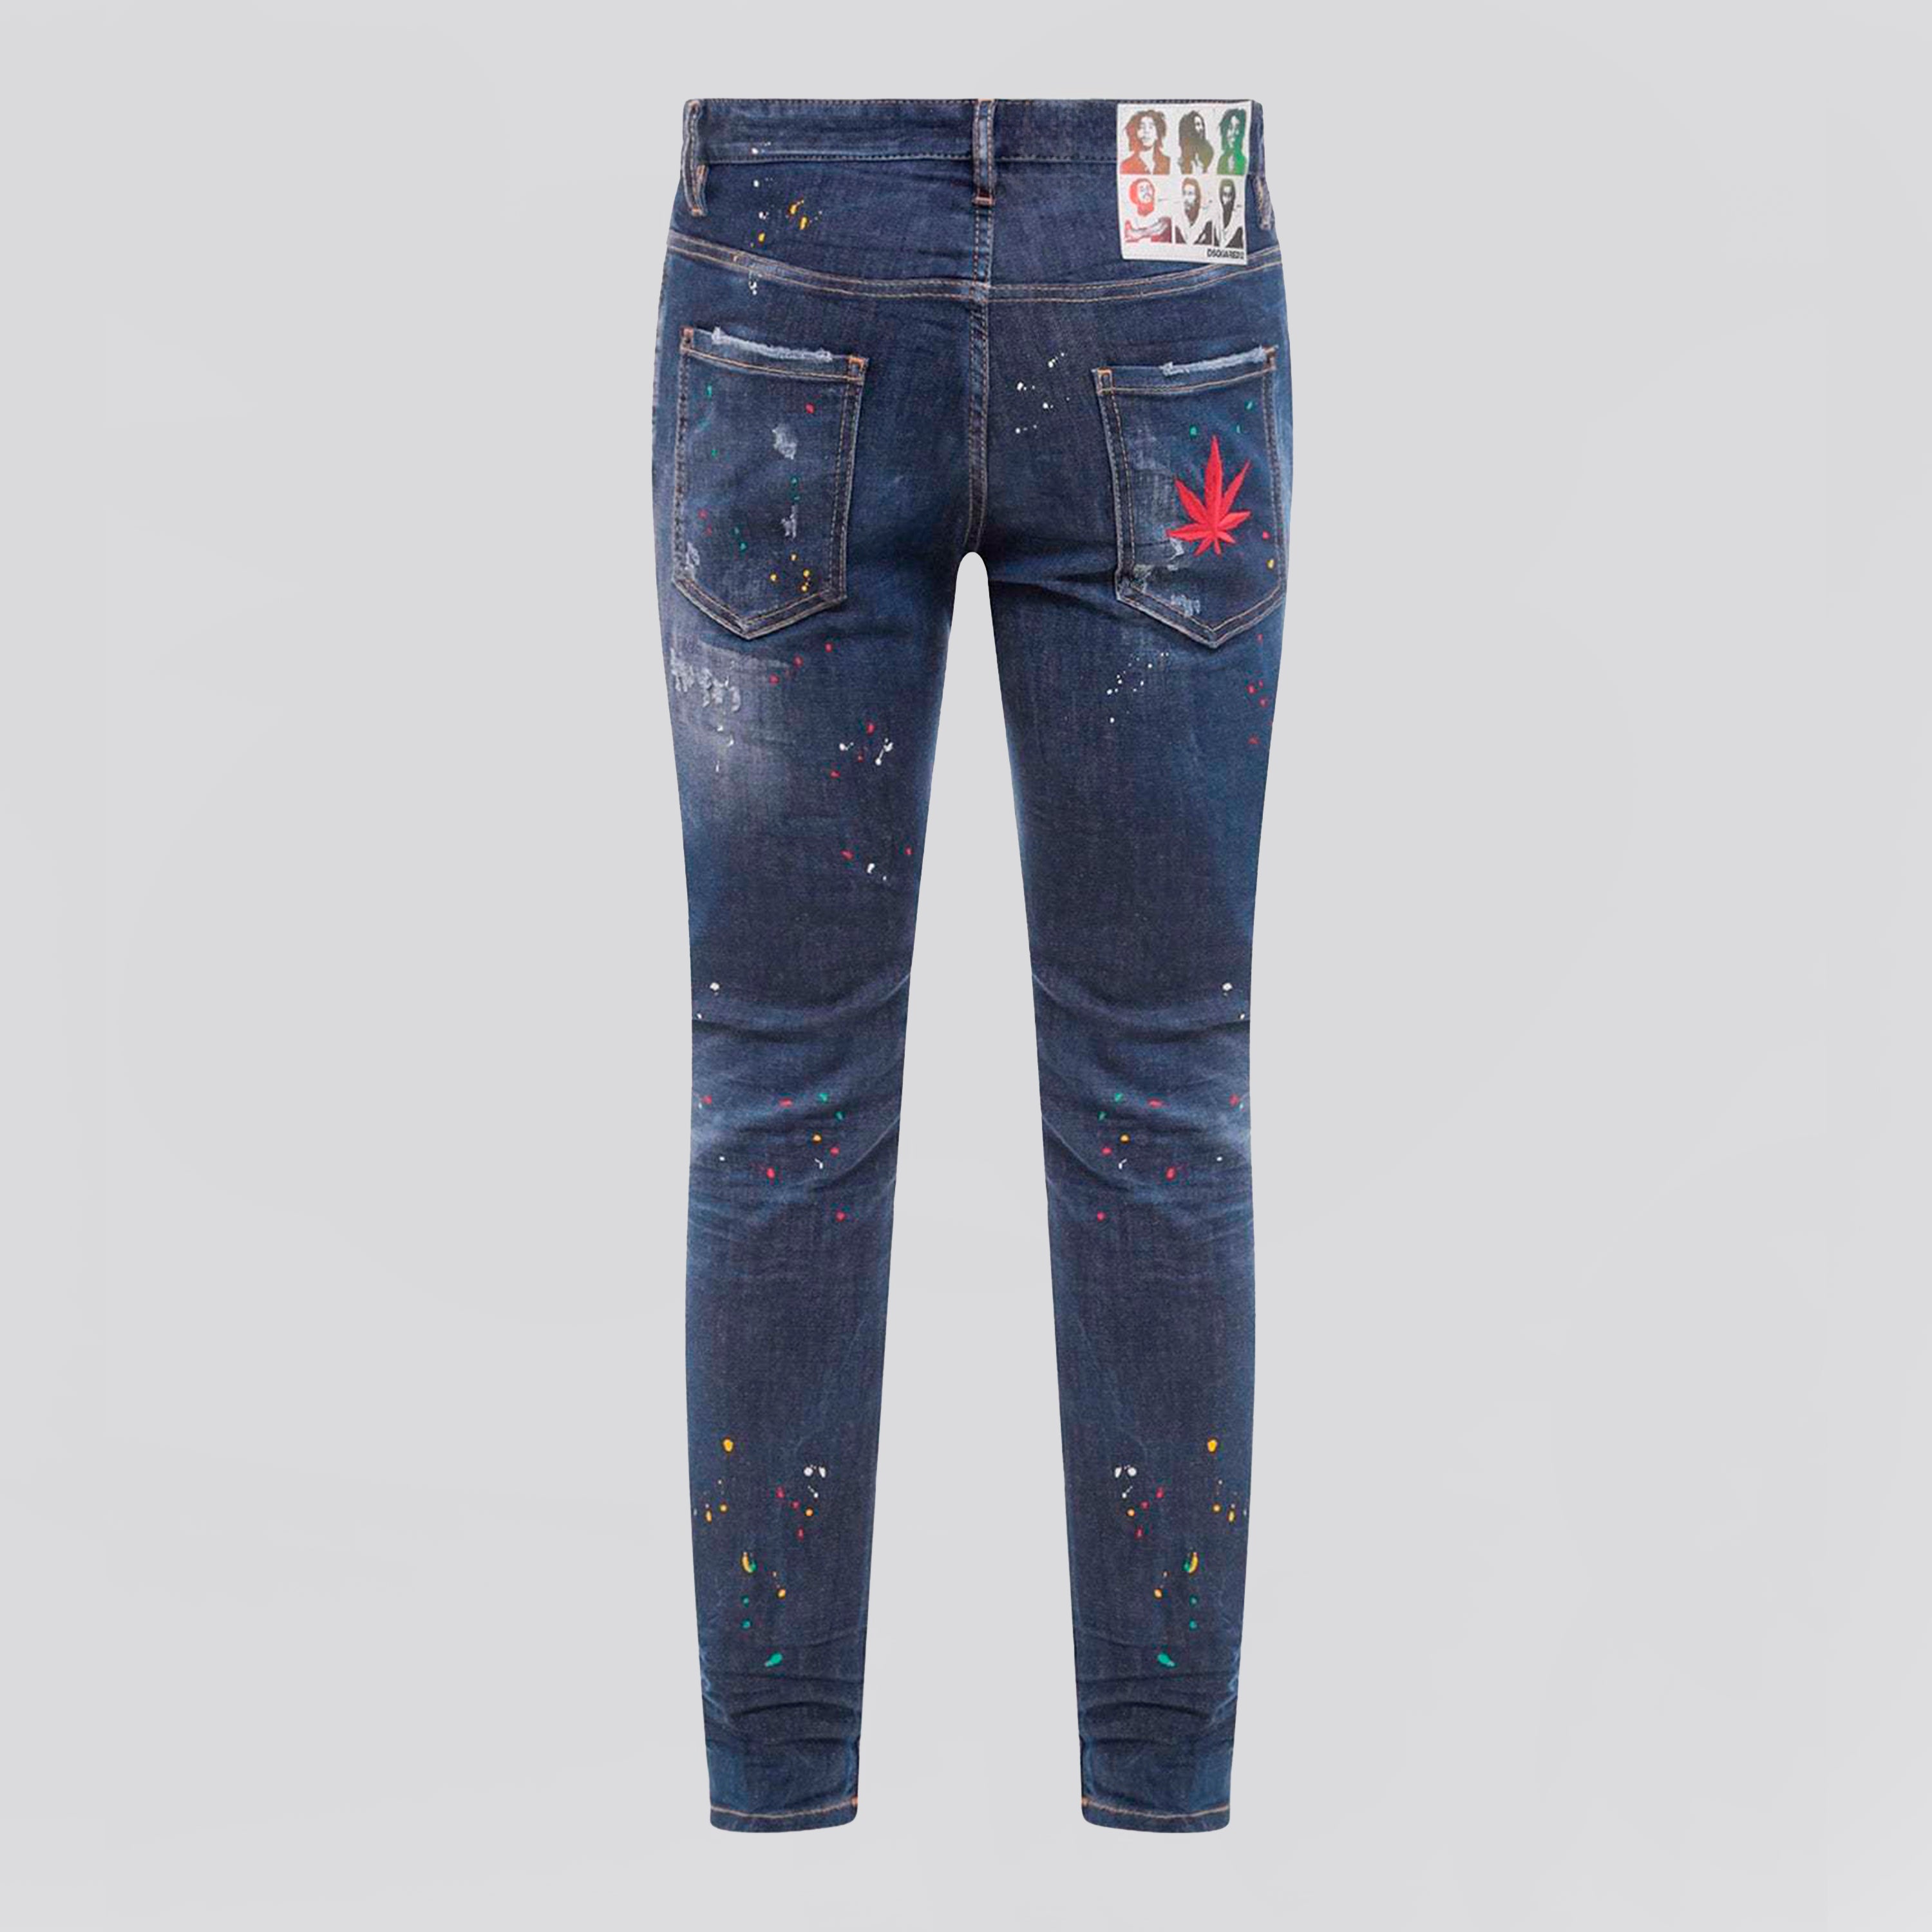 Jeans Denim Dsquared2 Super Twinky Painted